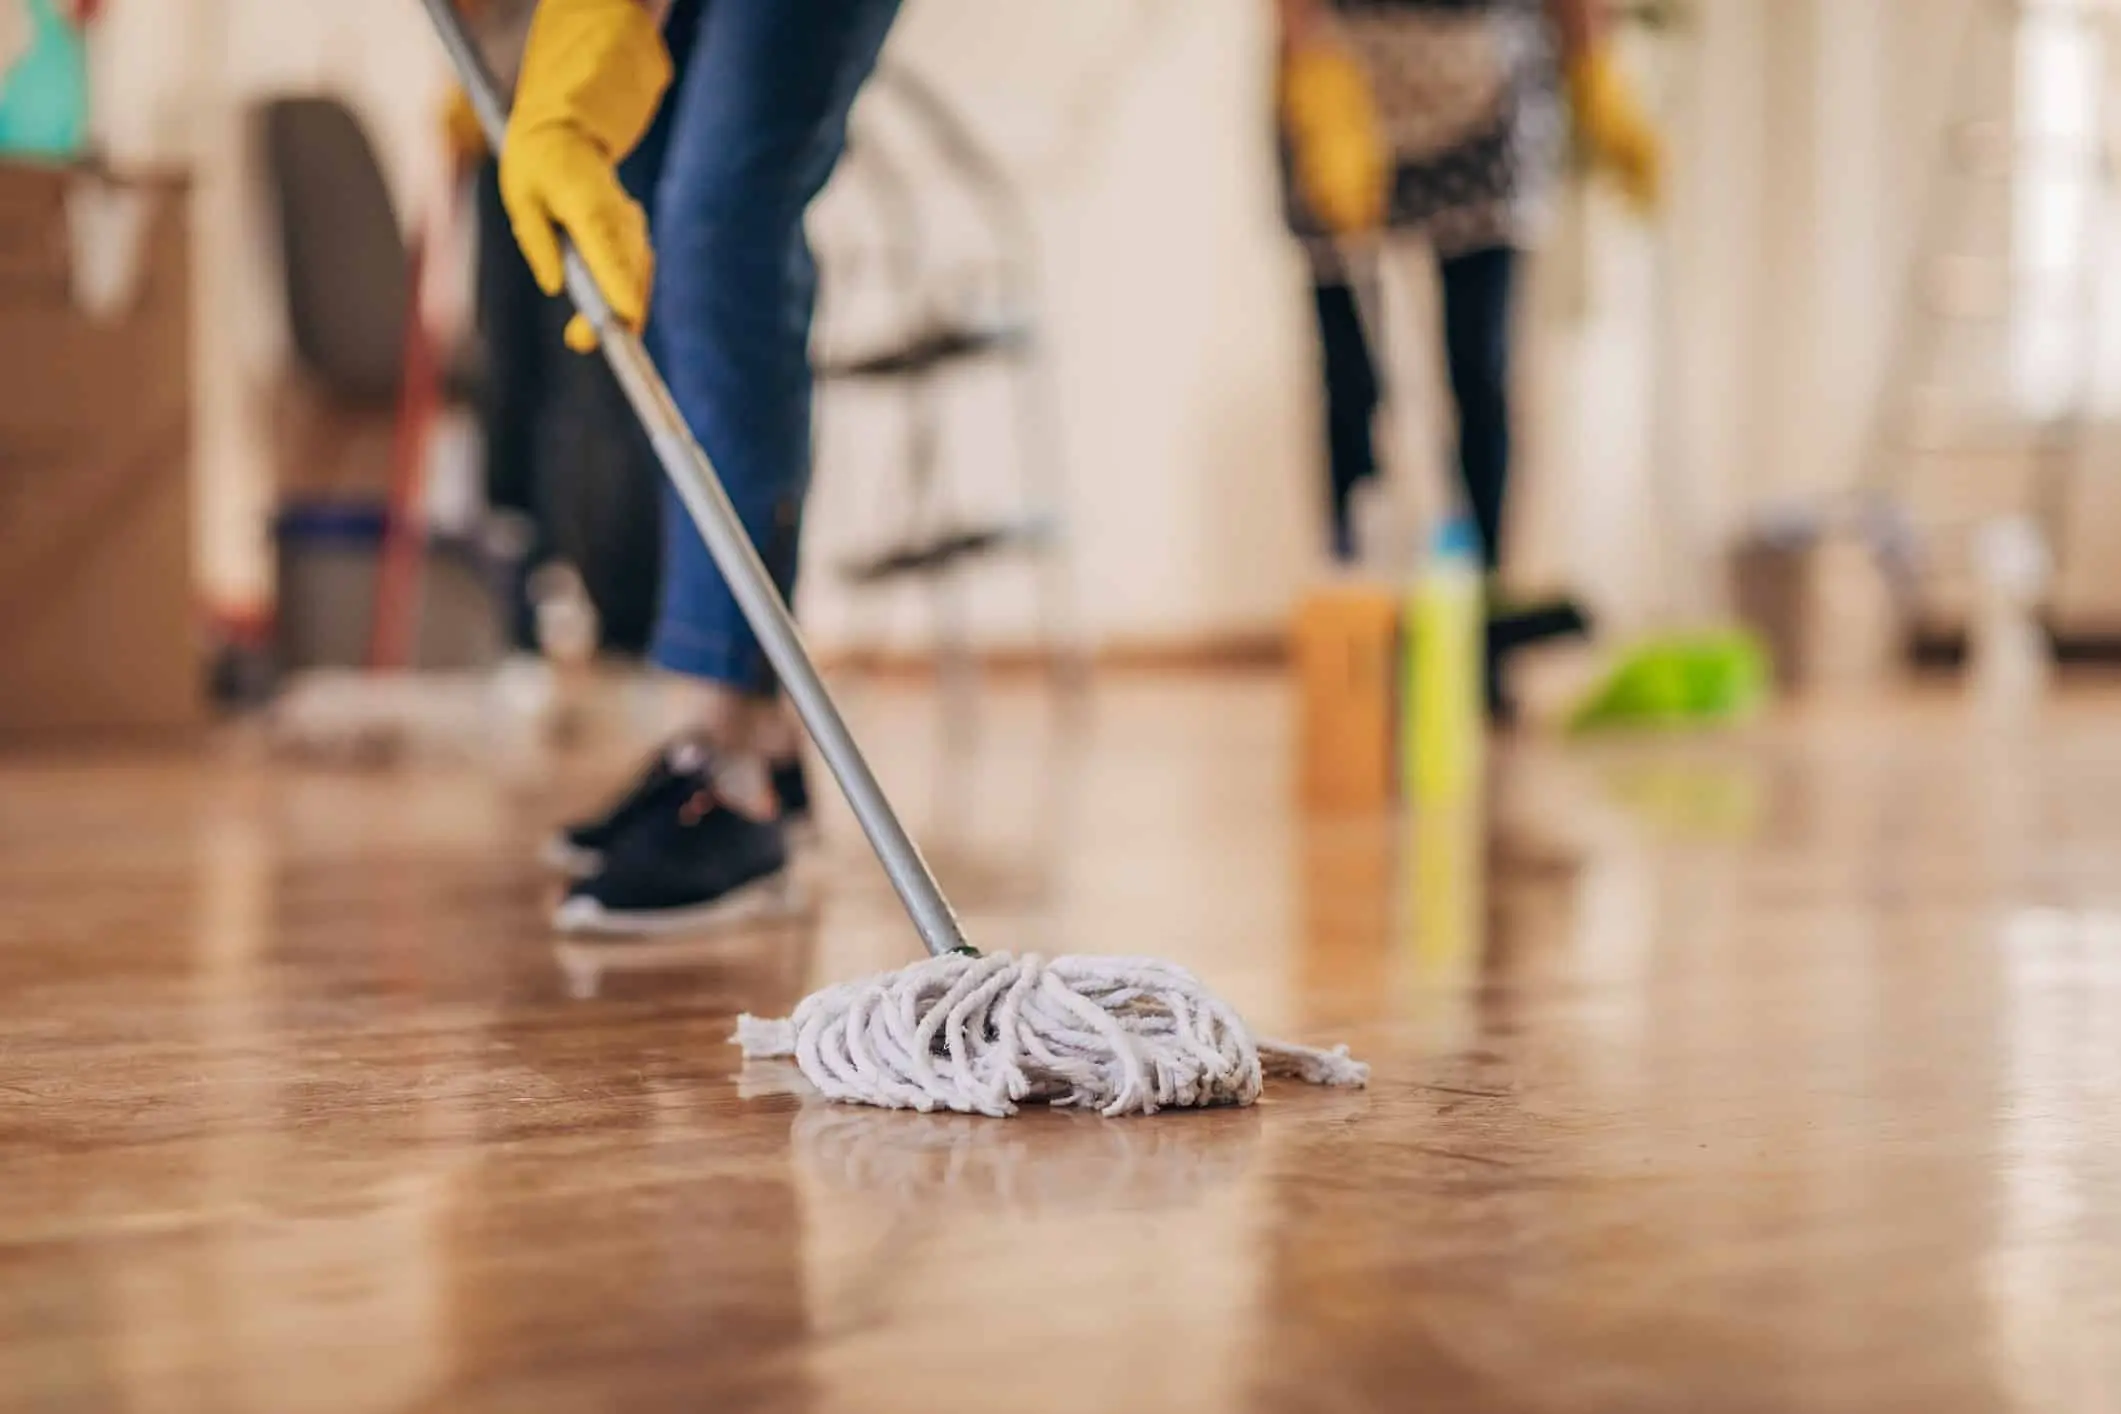 How Much to Tip House Cleaning Service